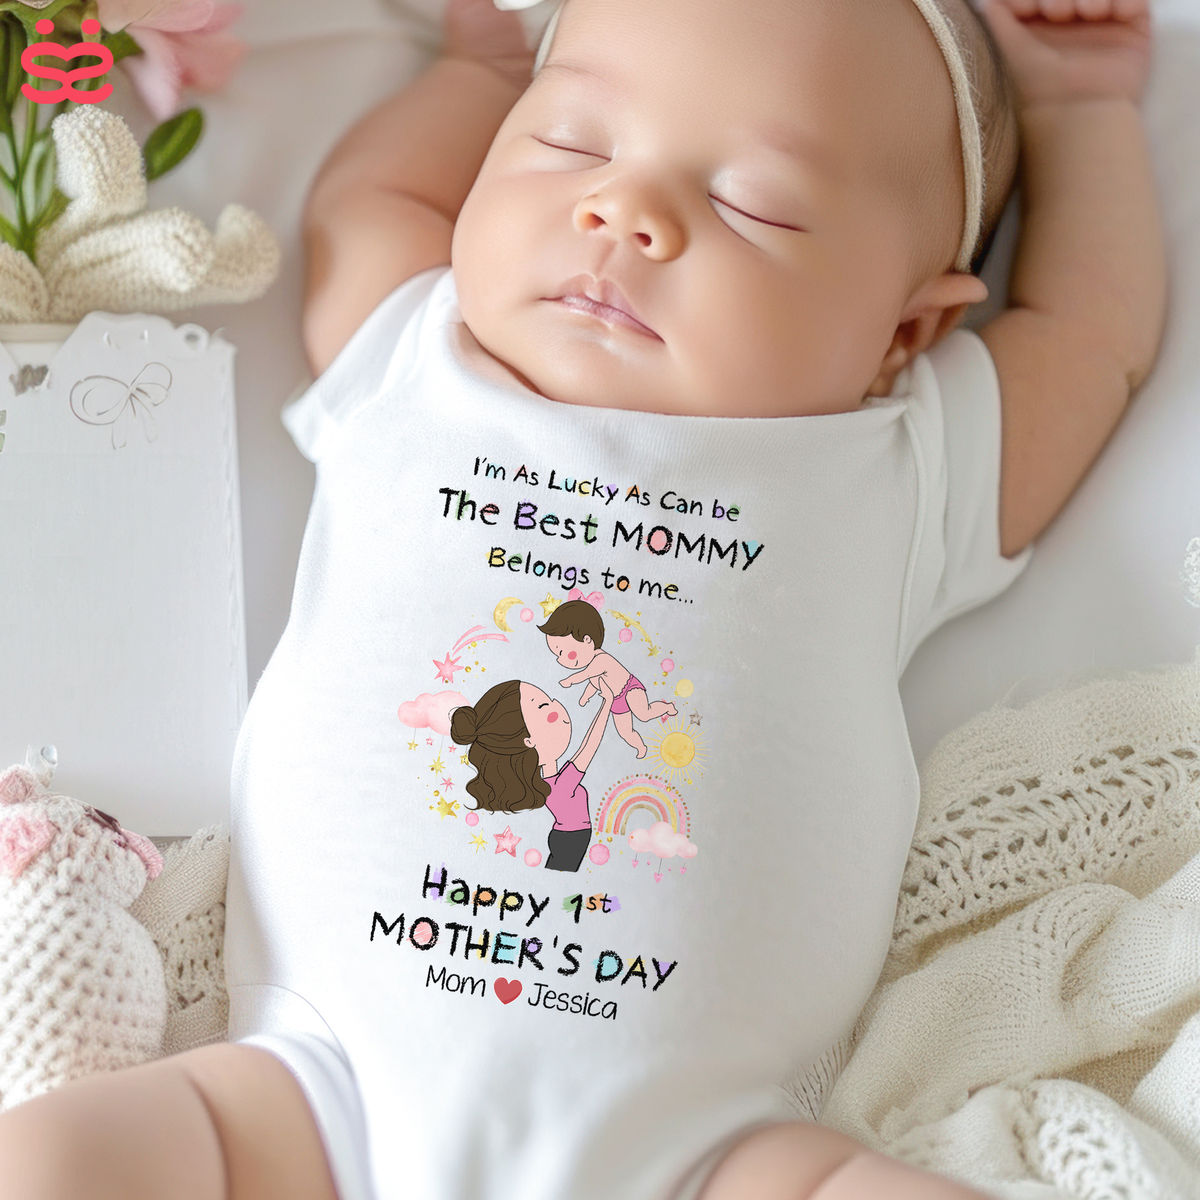 Custom Baby Onesies - I’m As Lucky As Can be The Best Mommy Belongs to me...(43449) - Mother's Day 2024 - Personalized Onesie